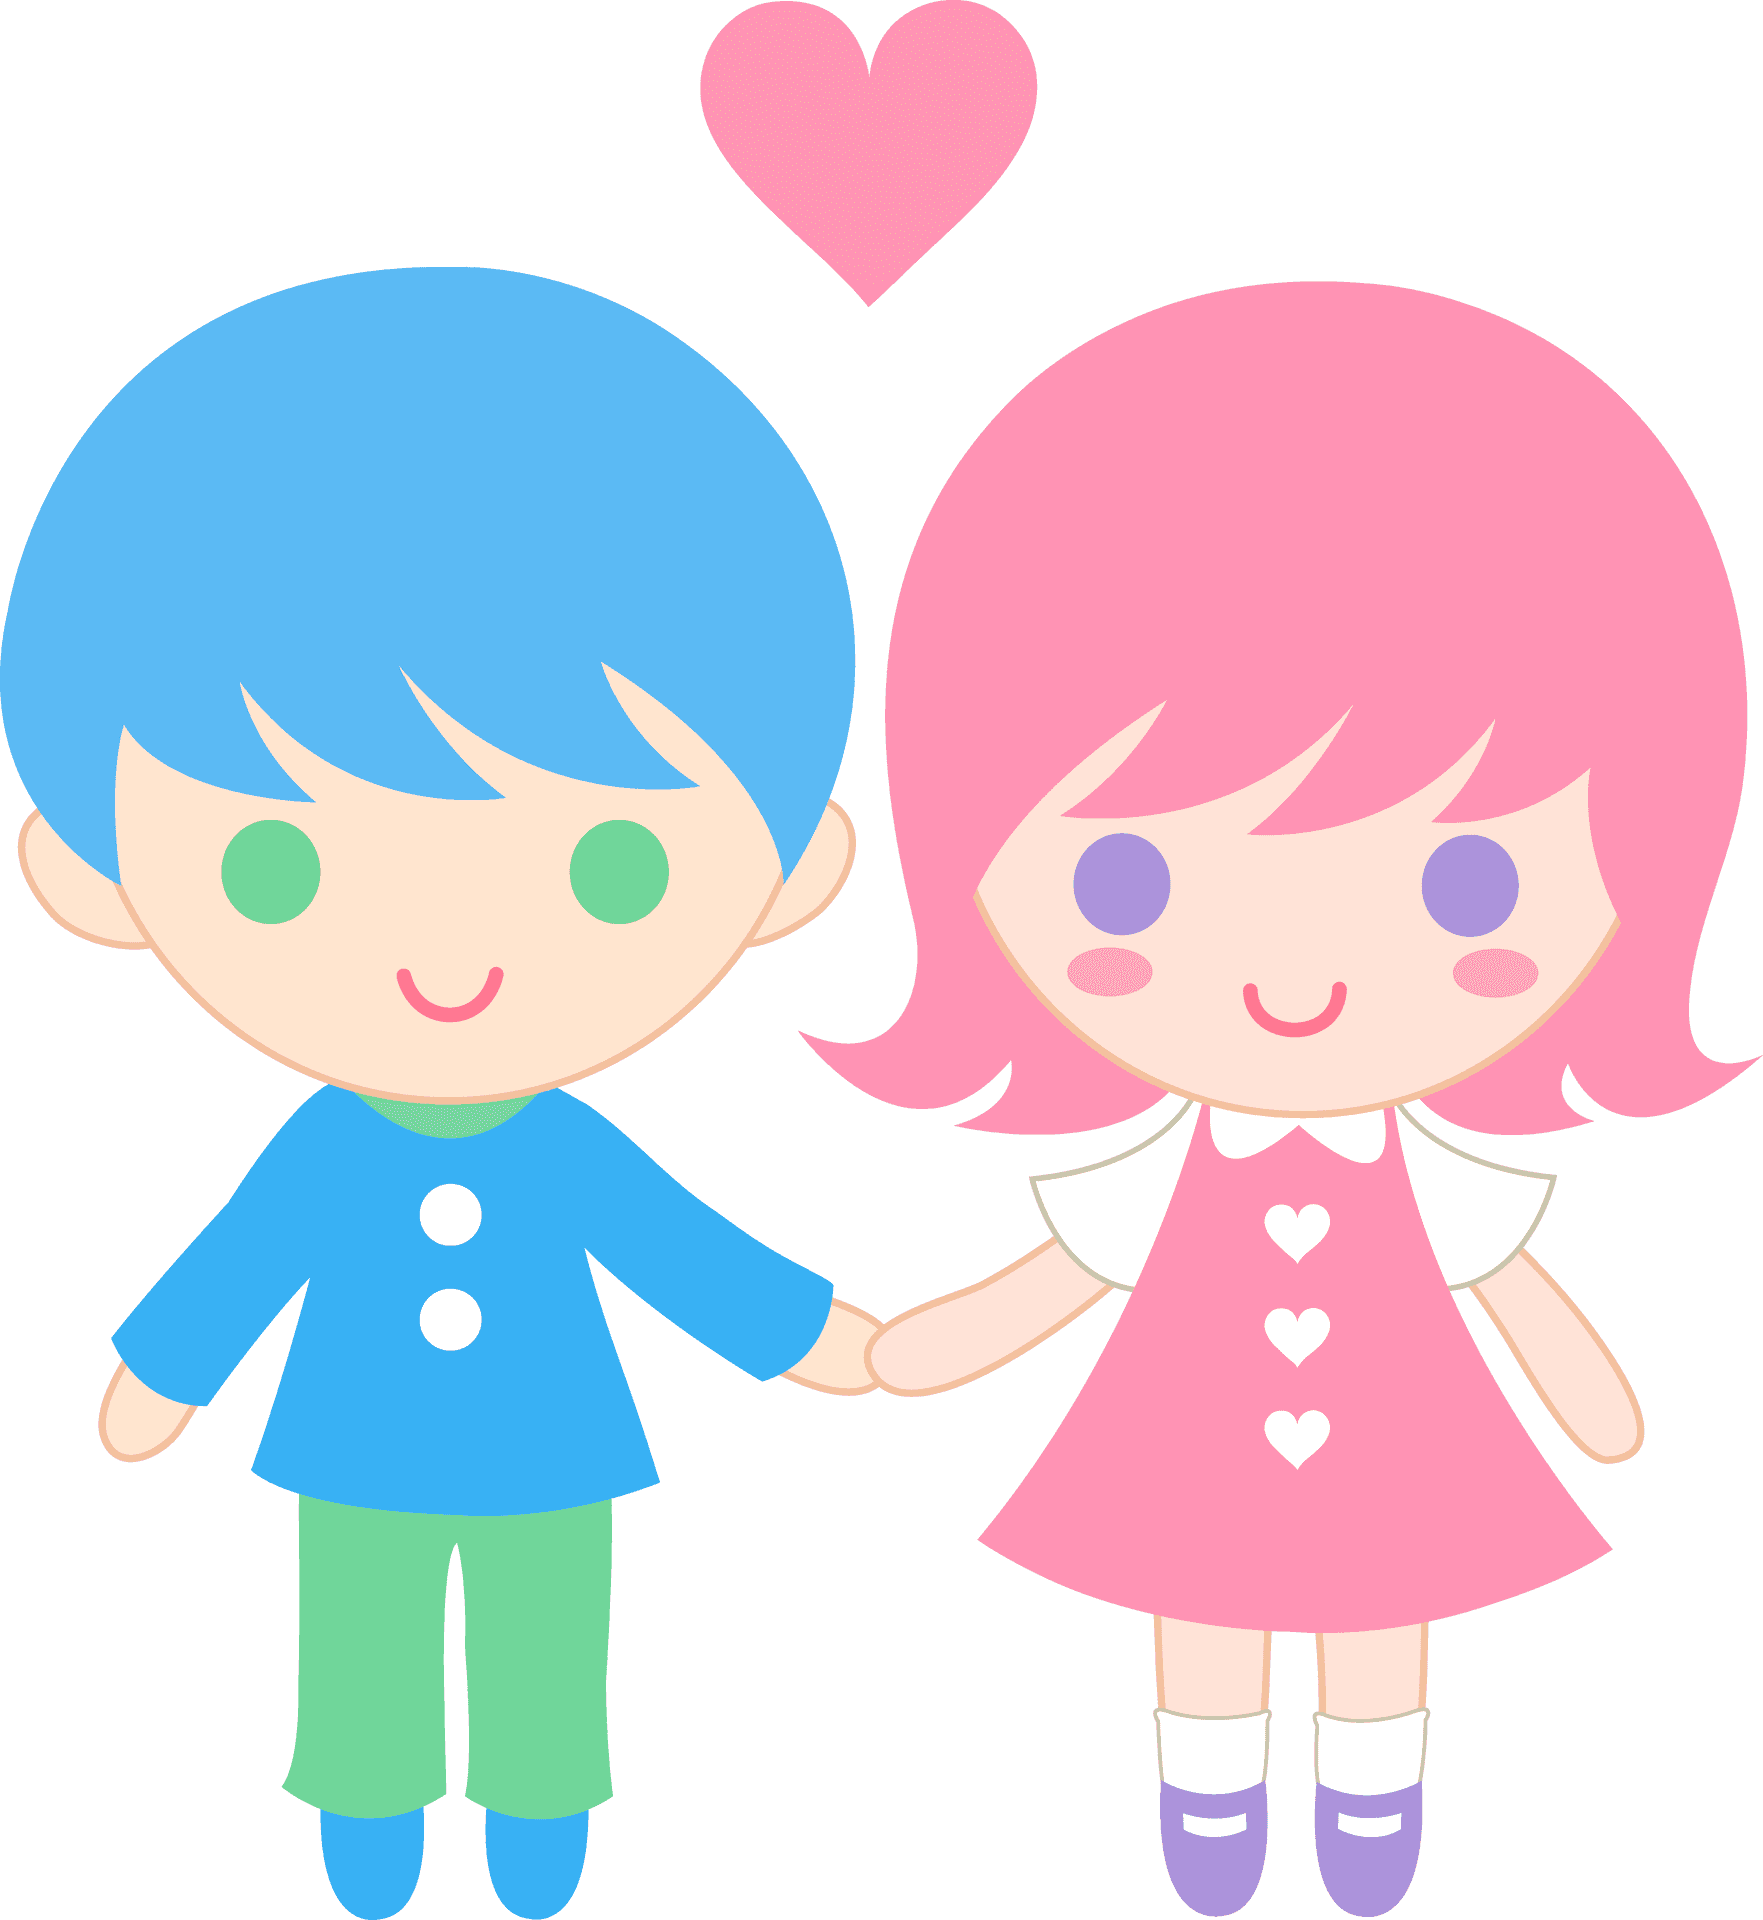 Animated Love Couple Holding Hands PNG image